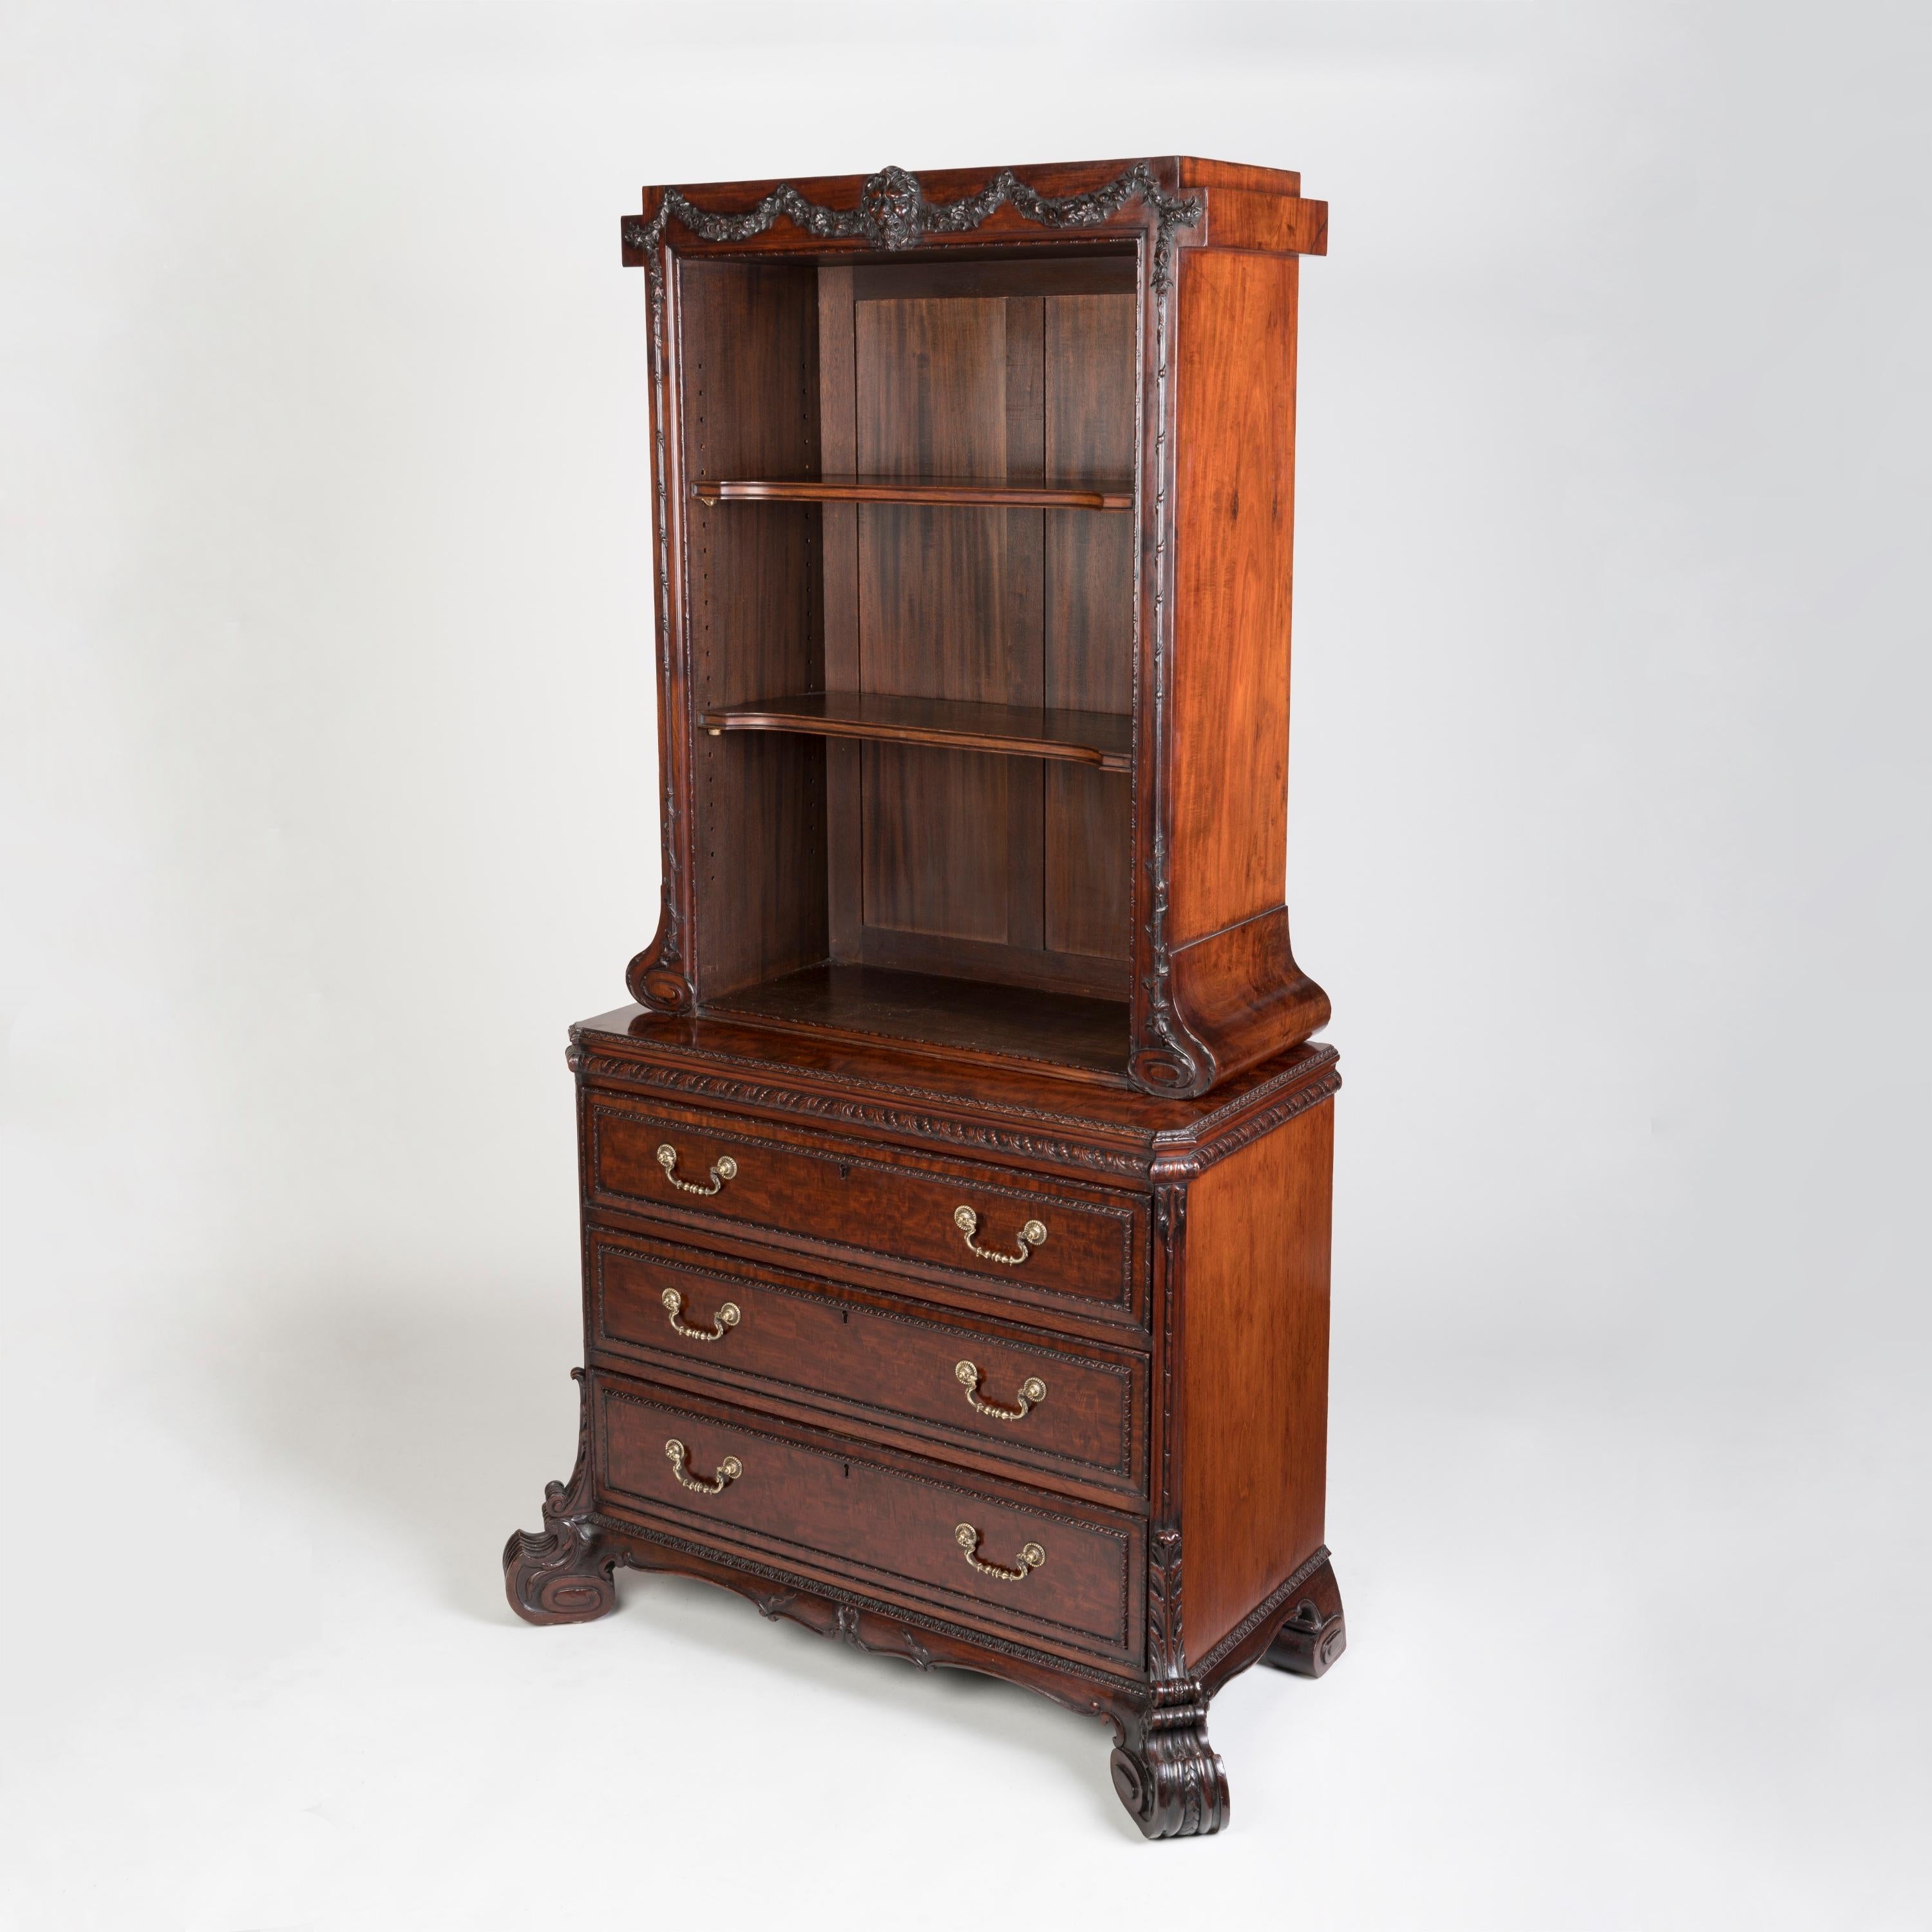 George II 19th Century Carved Mahogany Cabinet Bookcase by H. Samuel in the Georgian Style For Sale